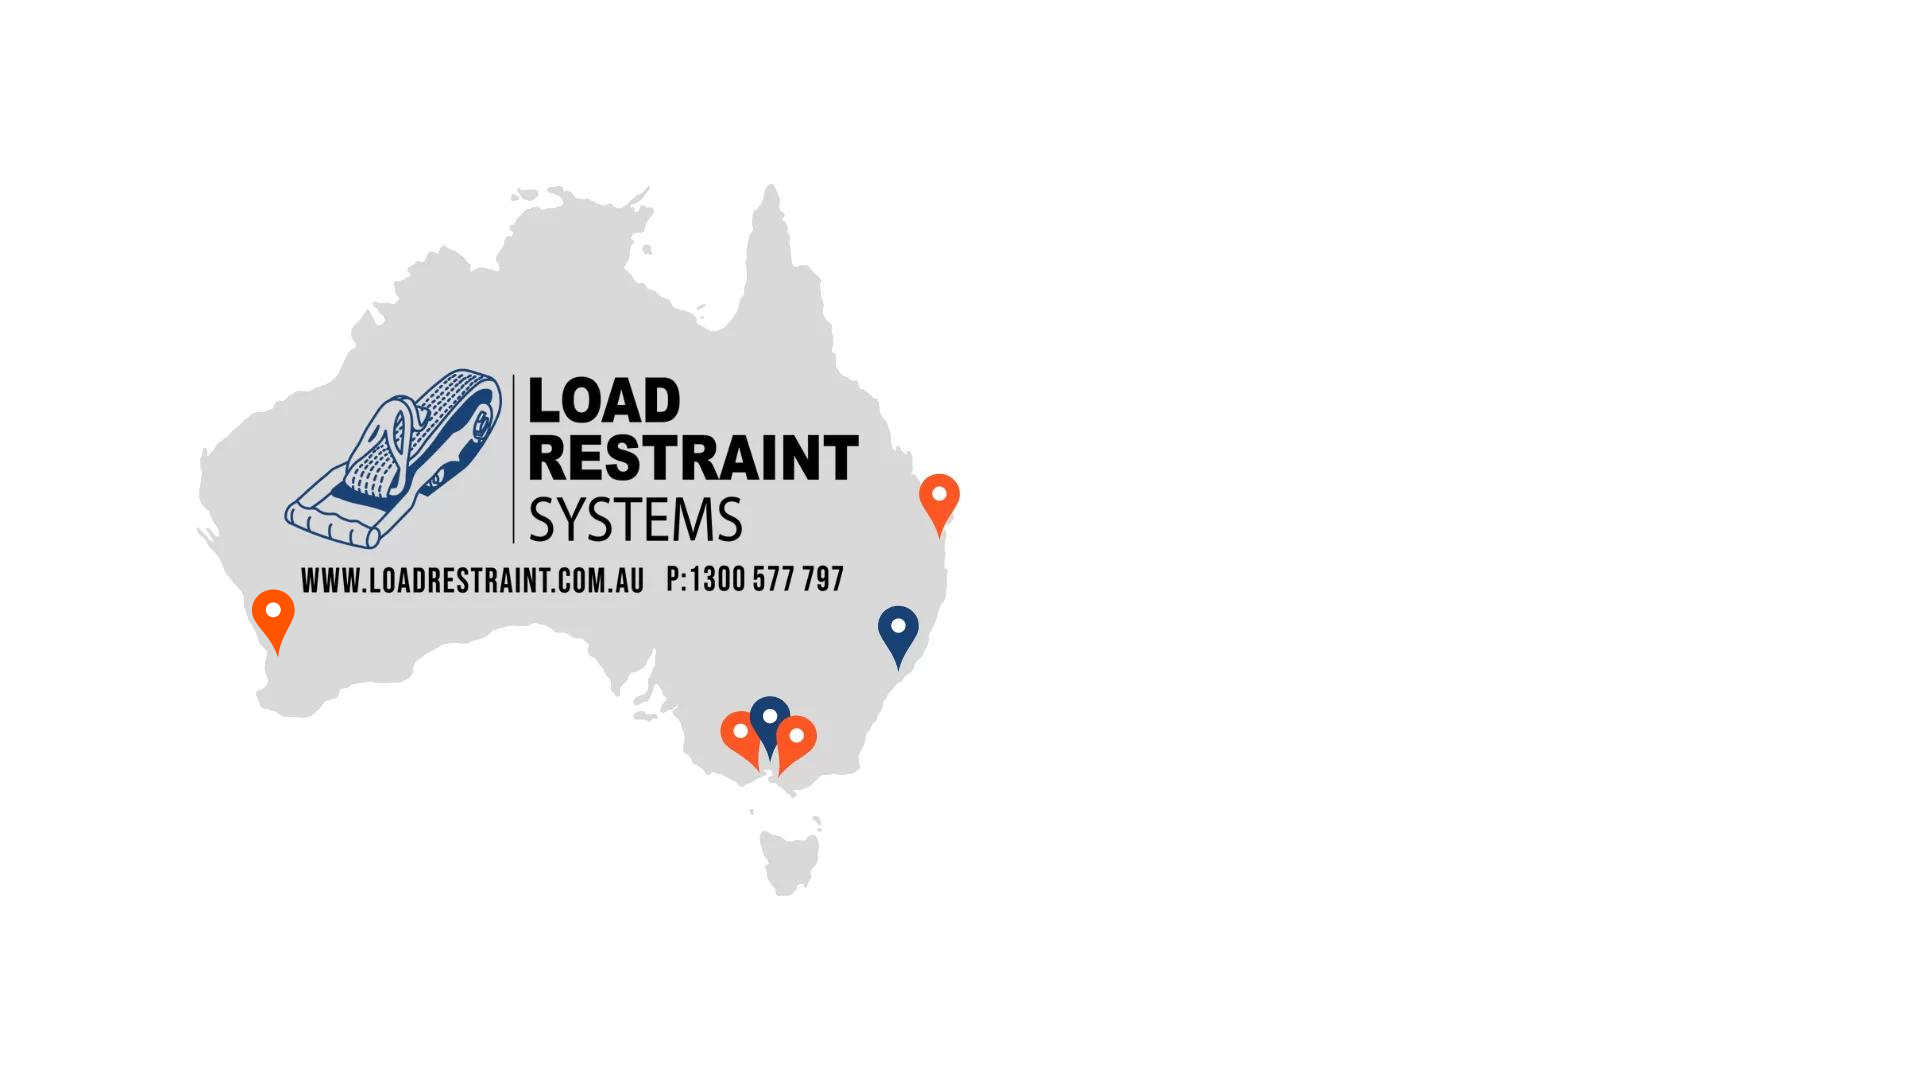 Load Restraint Systems (LRS)